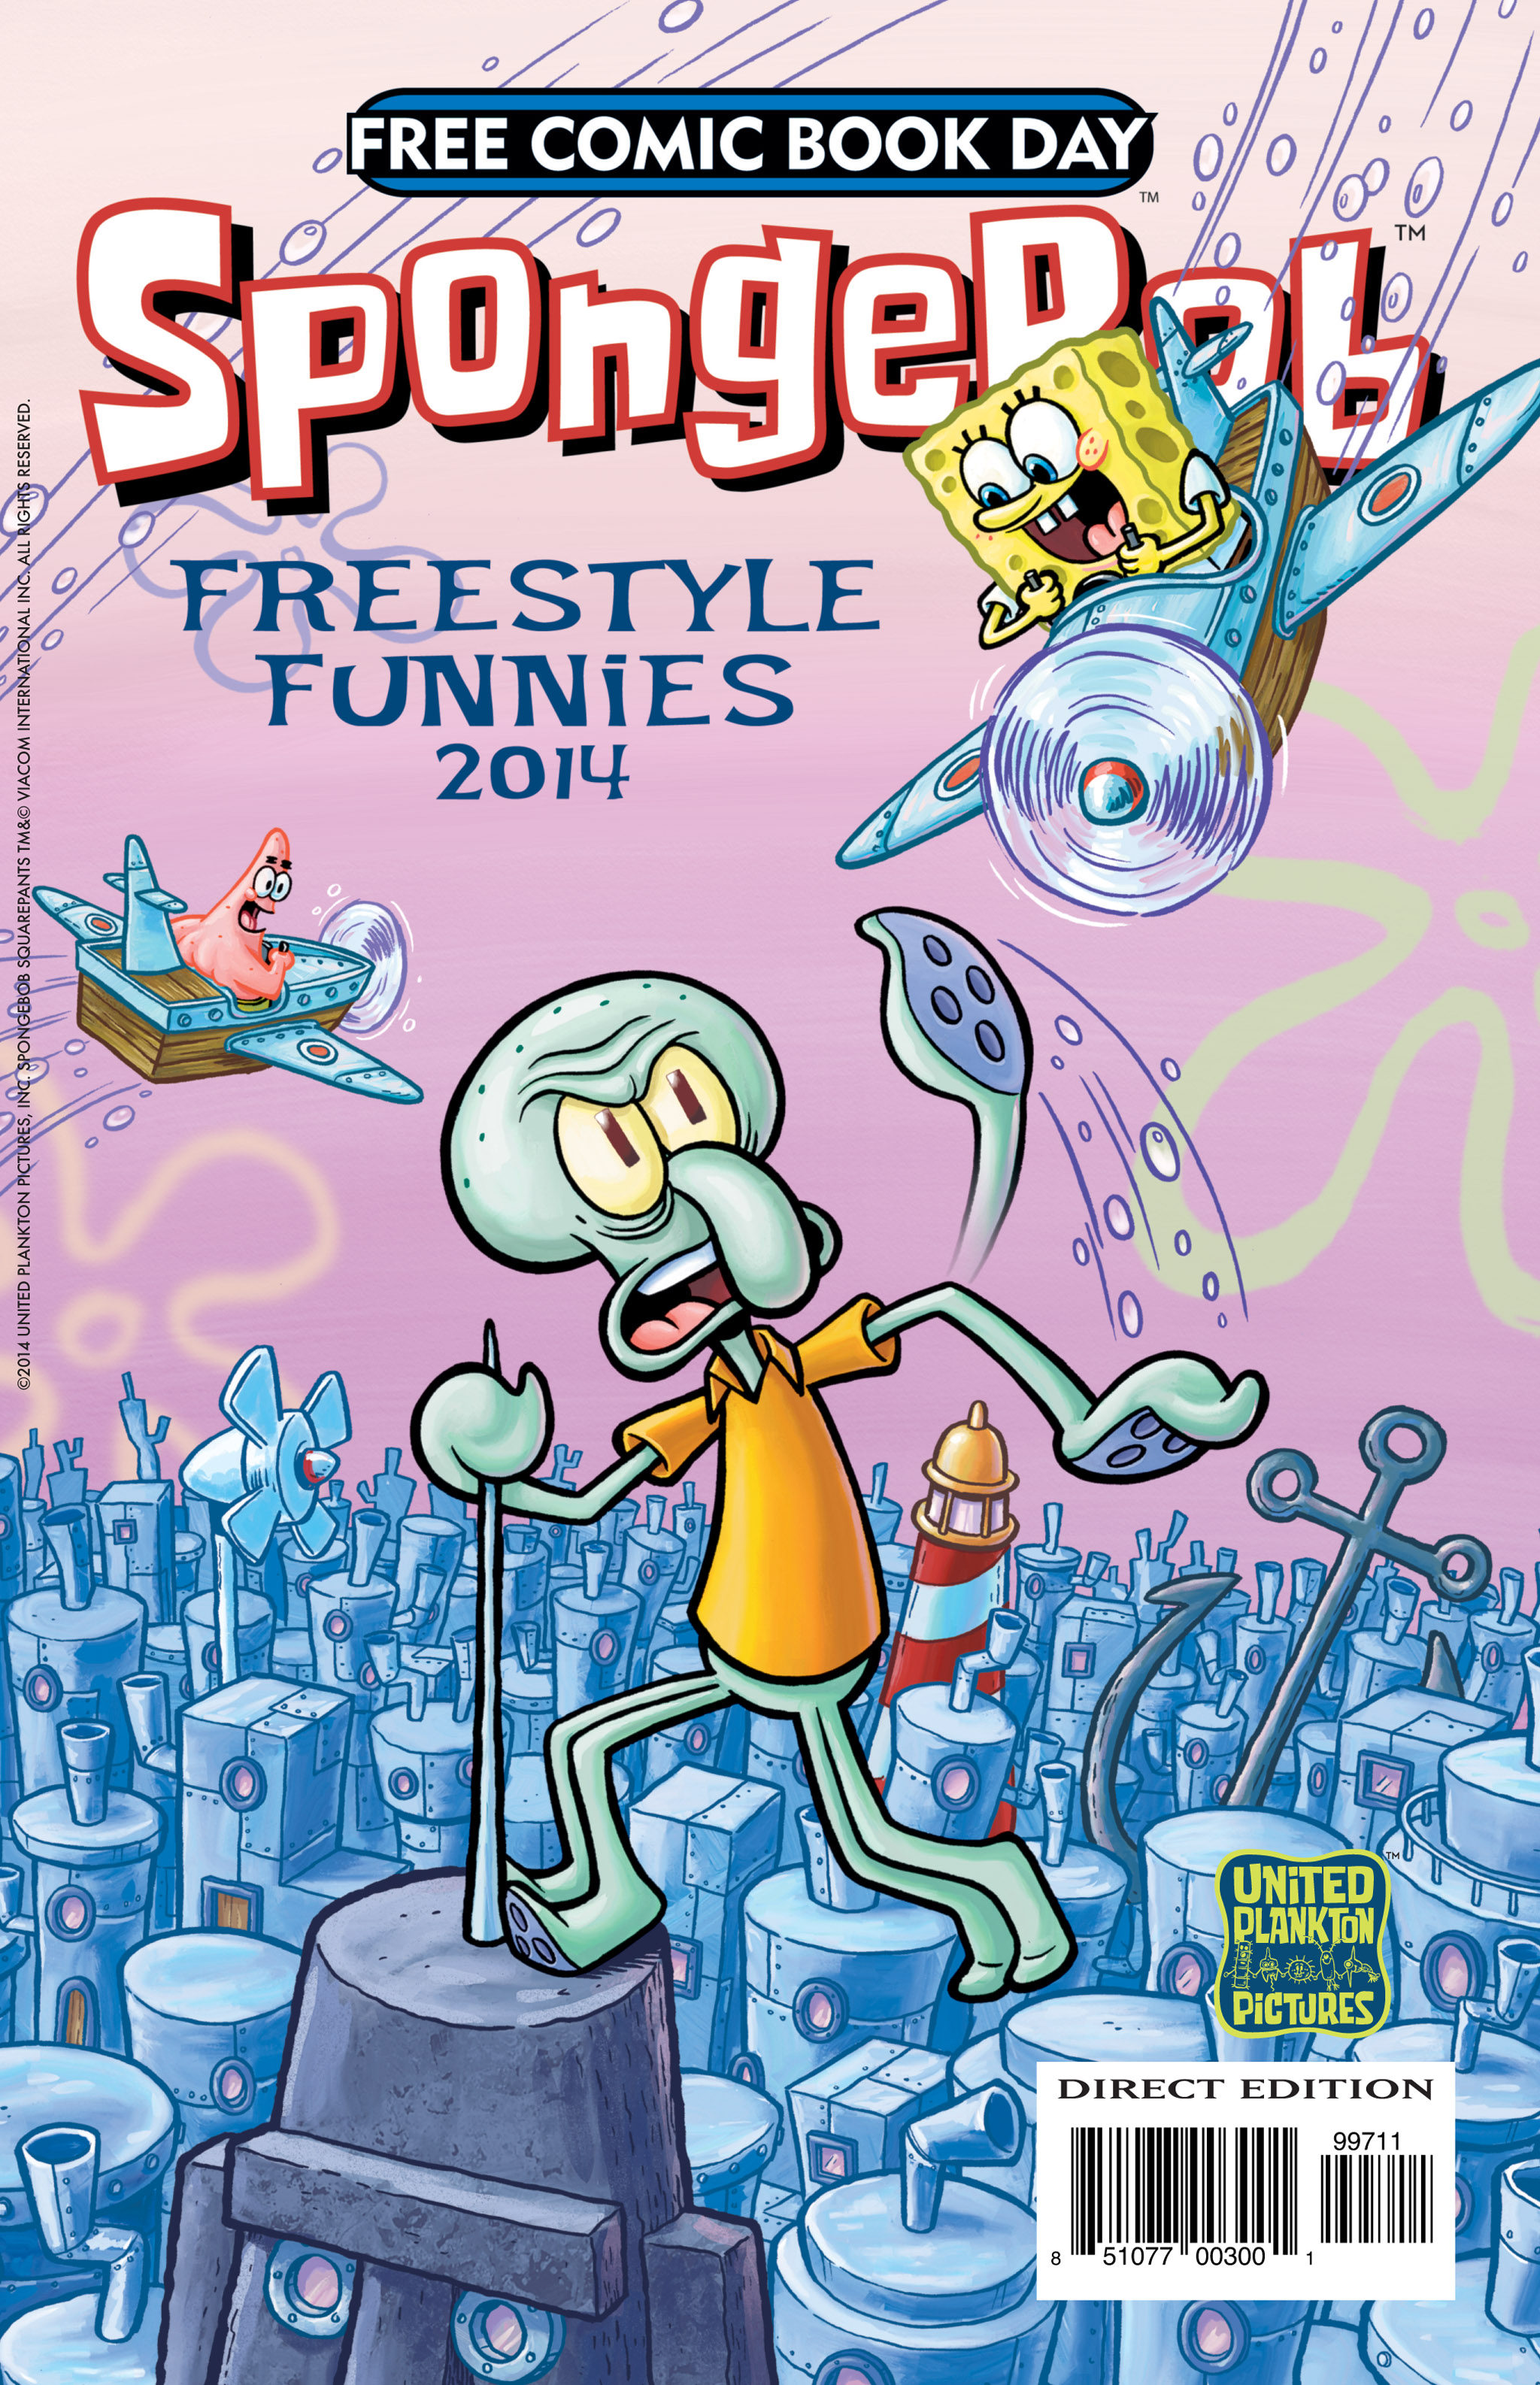 Read online Free Comic Book Day 2014 comic -  Issue # SpongeBob Freestyle Funnies 2014 - 1